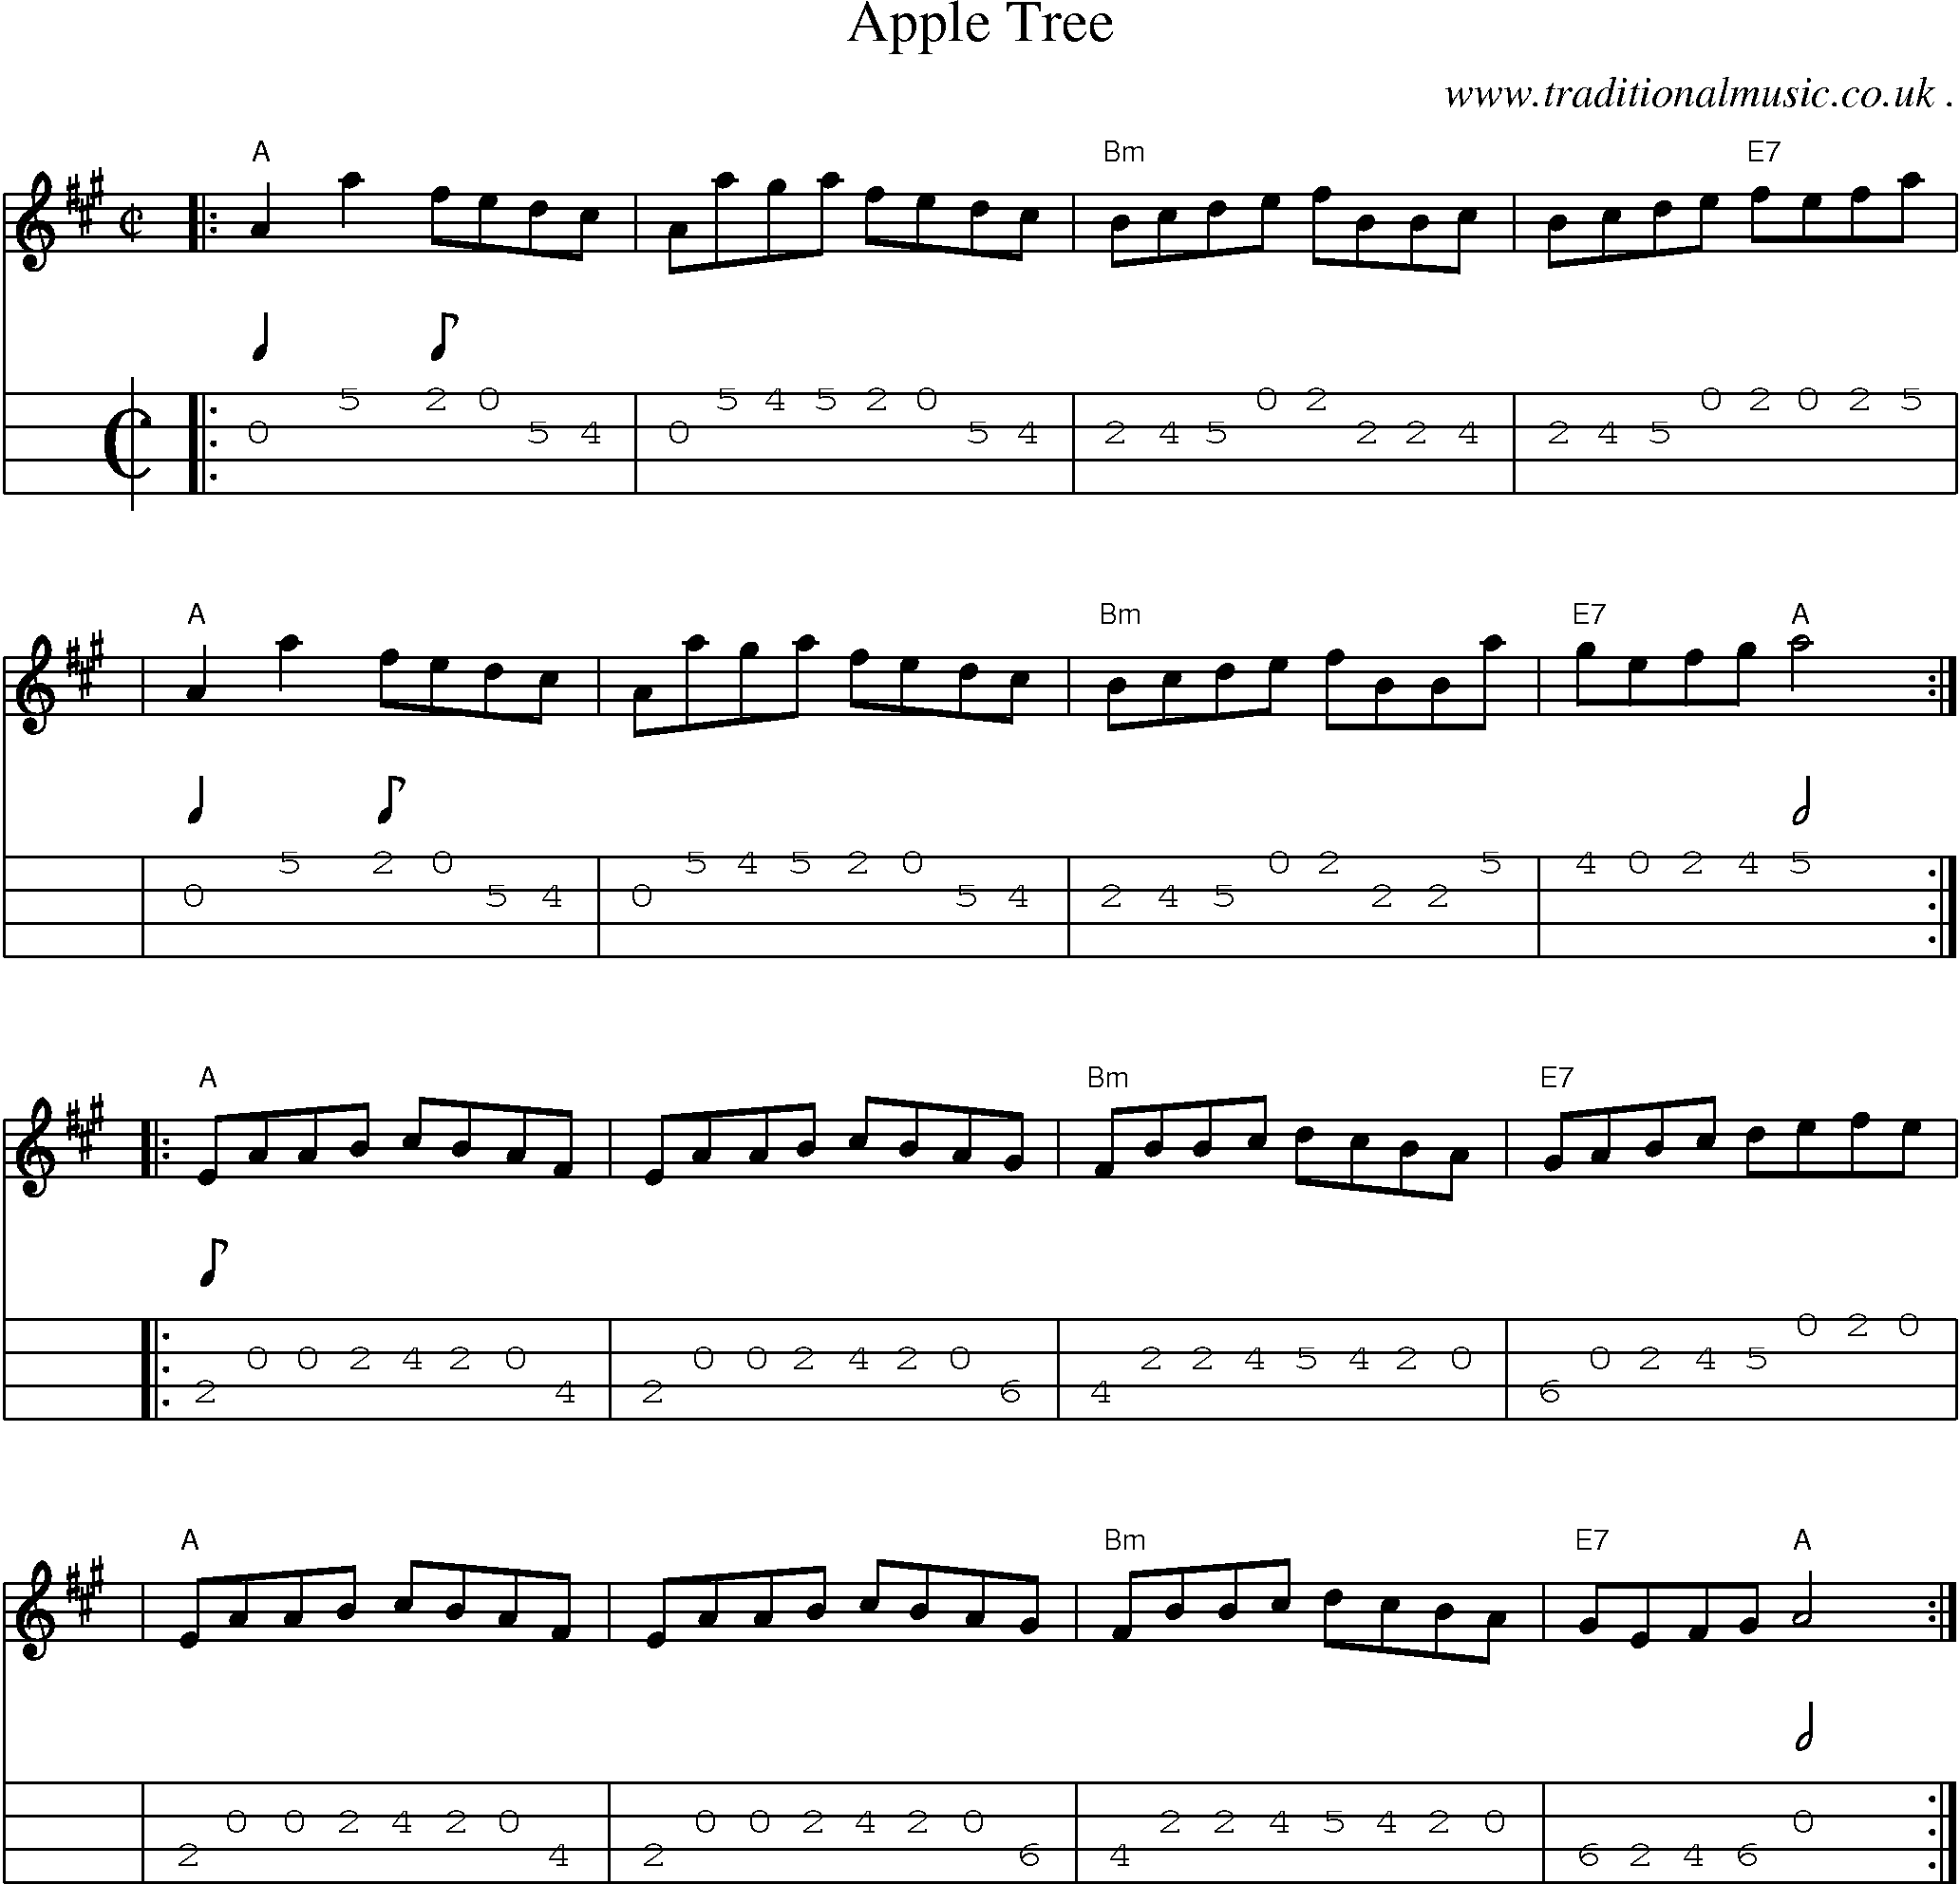 Sheet-music  score, Chords and Mandolin Tabs for Apple Tree